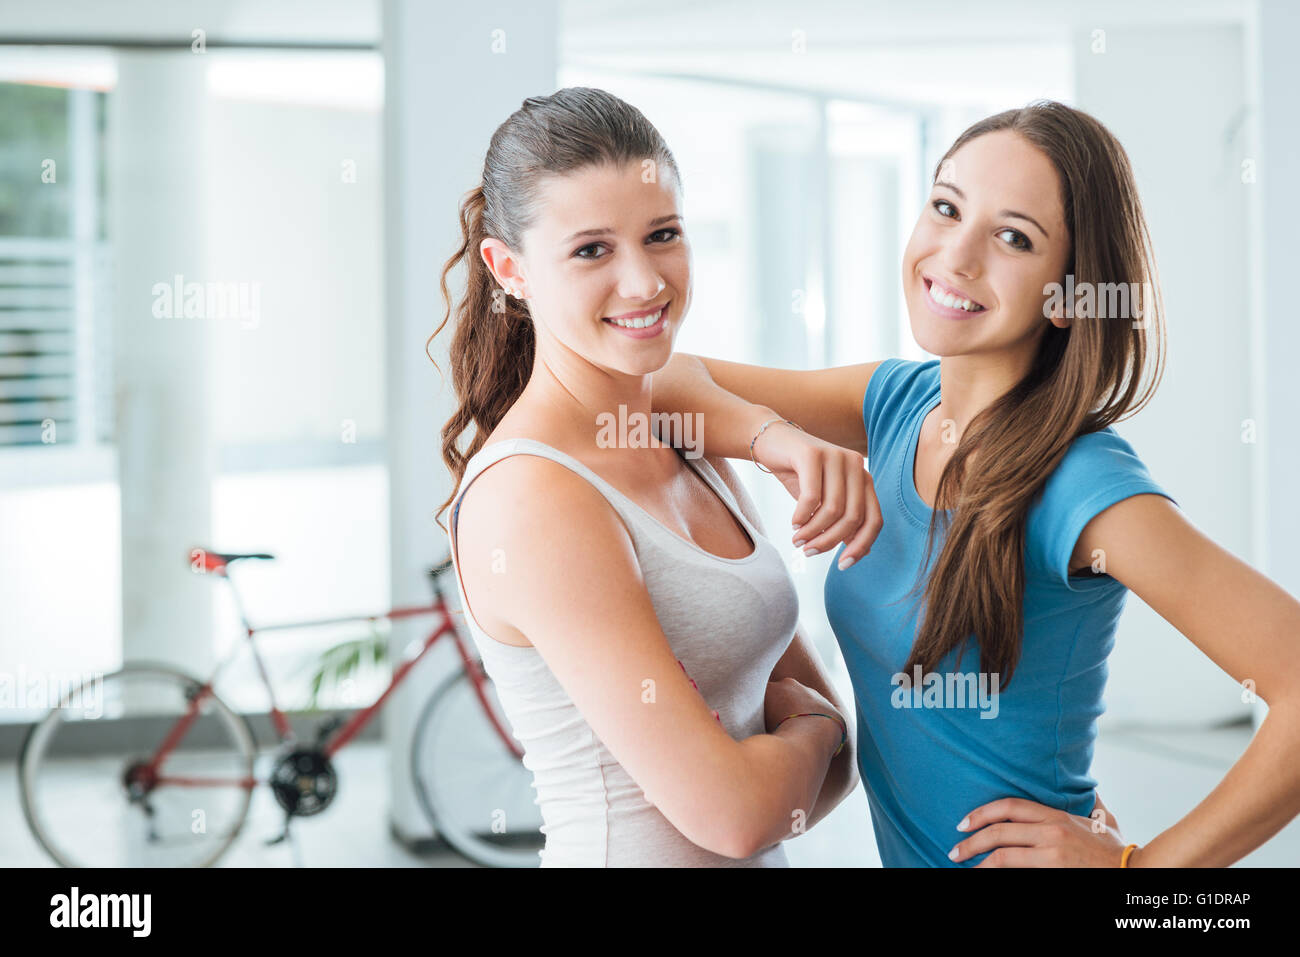 Cute teen girls smiling at camera, adolescence and friendship concept Stock Photo